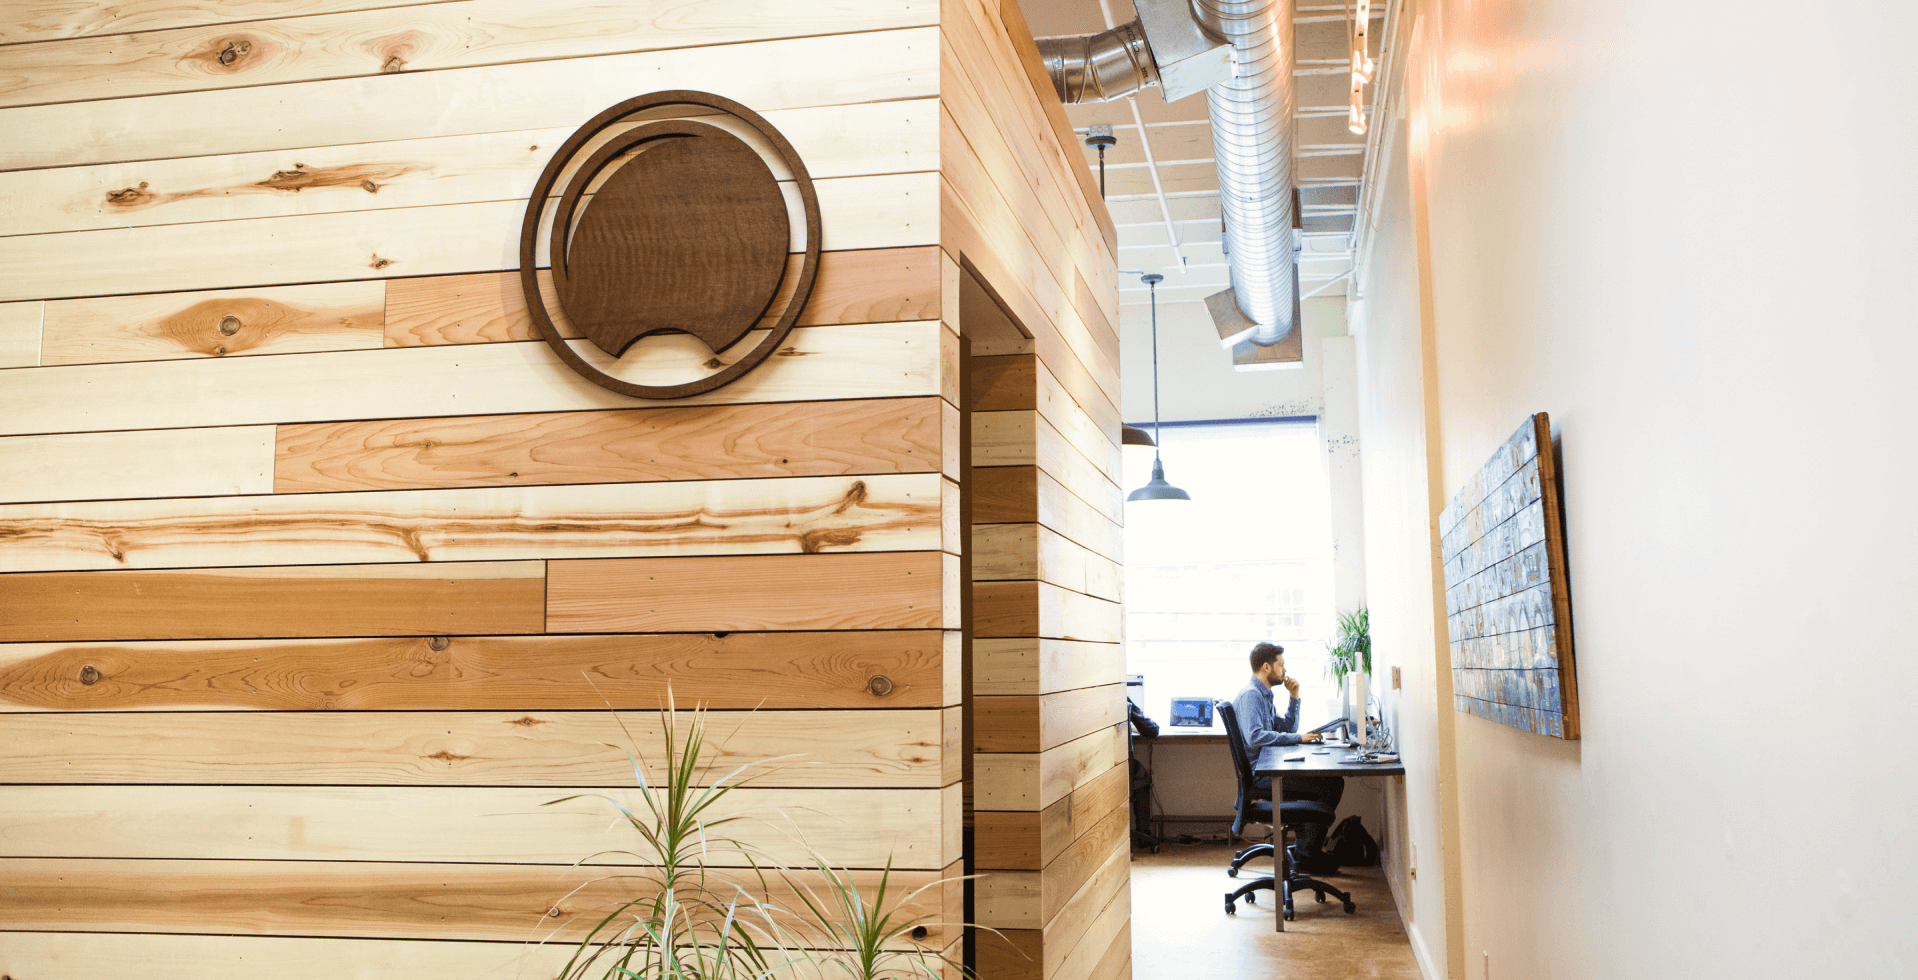 The Daylight office with wood walls